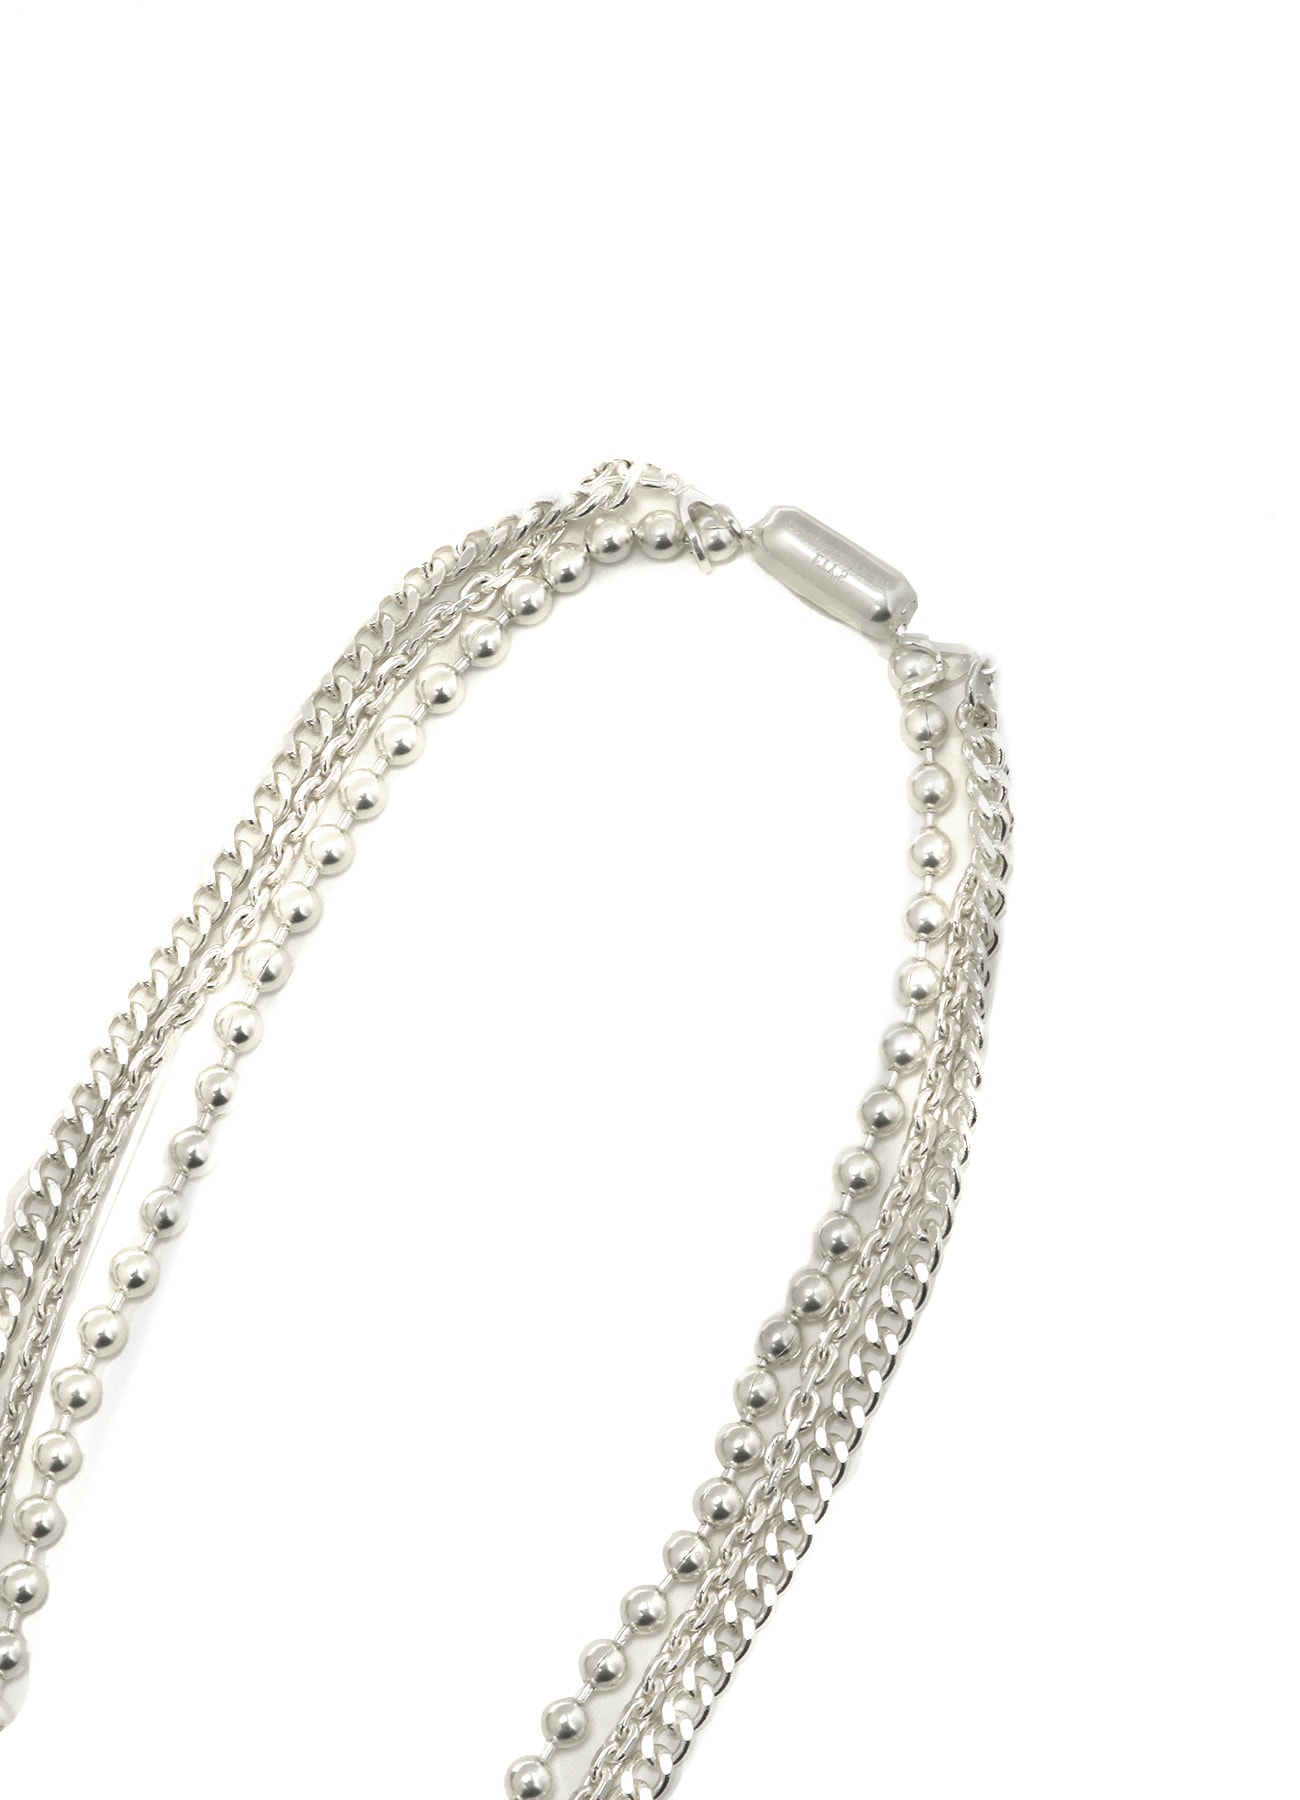 BRASS BALL CHAIN THREE-STRAND NECKLACE(FREE SIZE Silver): S'YTE 